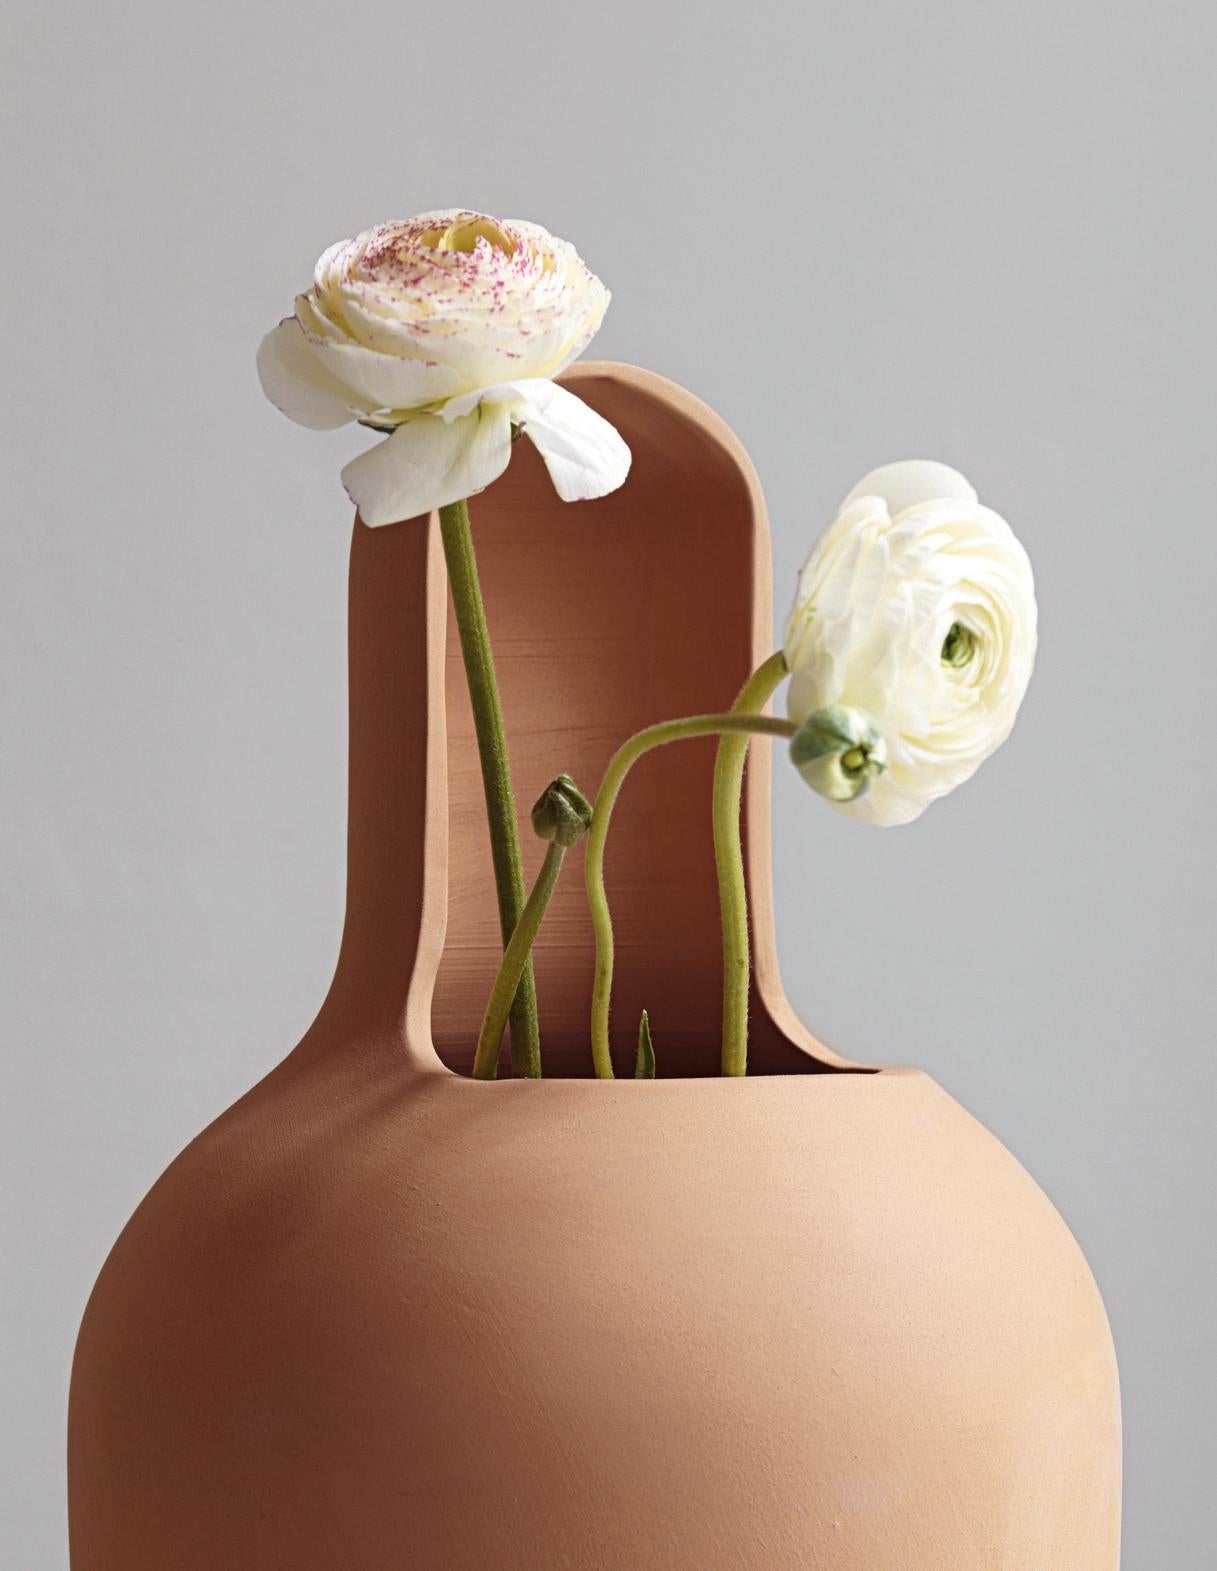 Spanish Set of 3 Outdoor Terracotta Vases from the series 